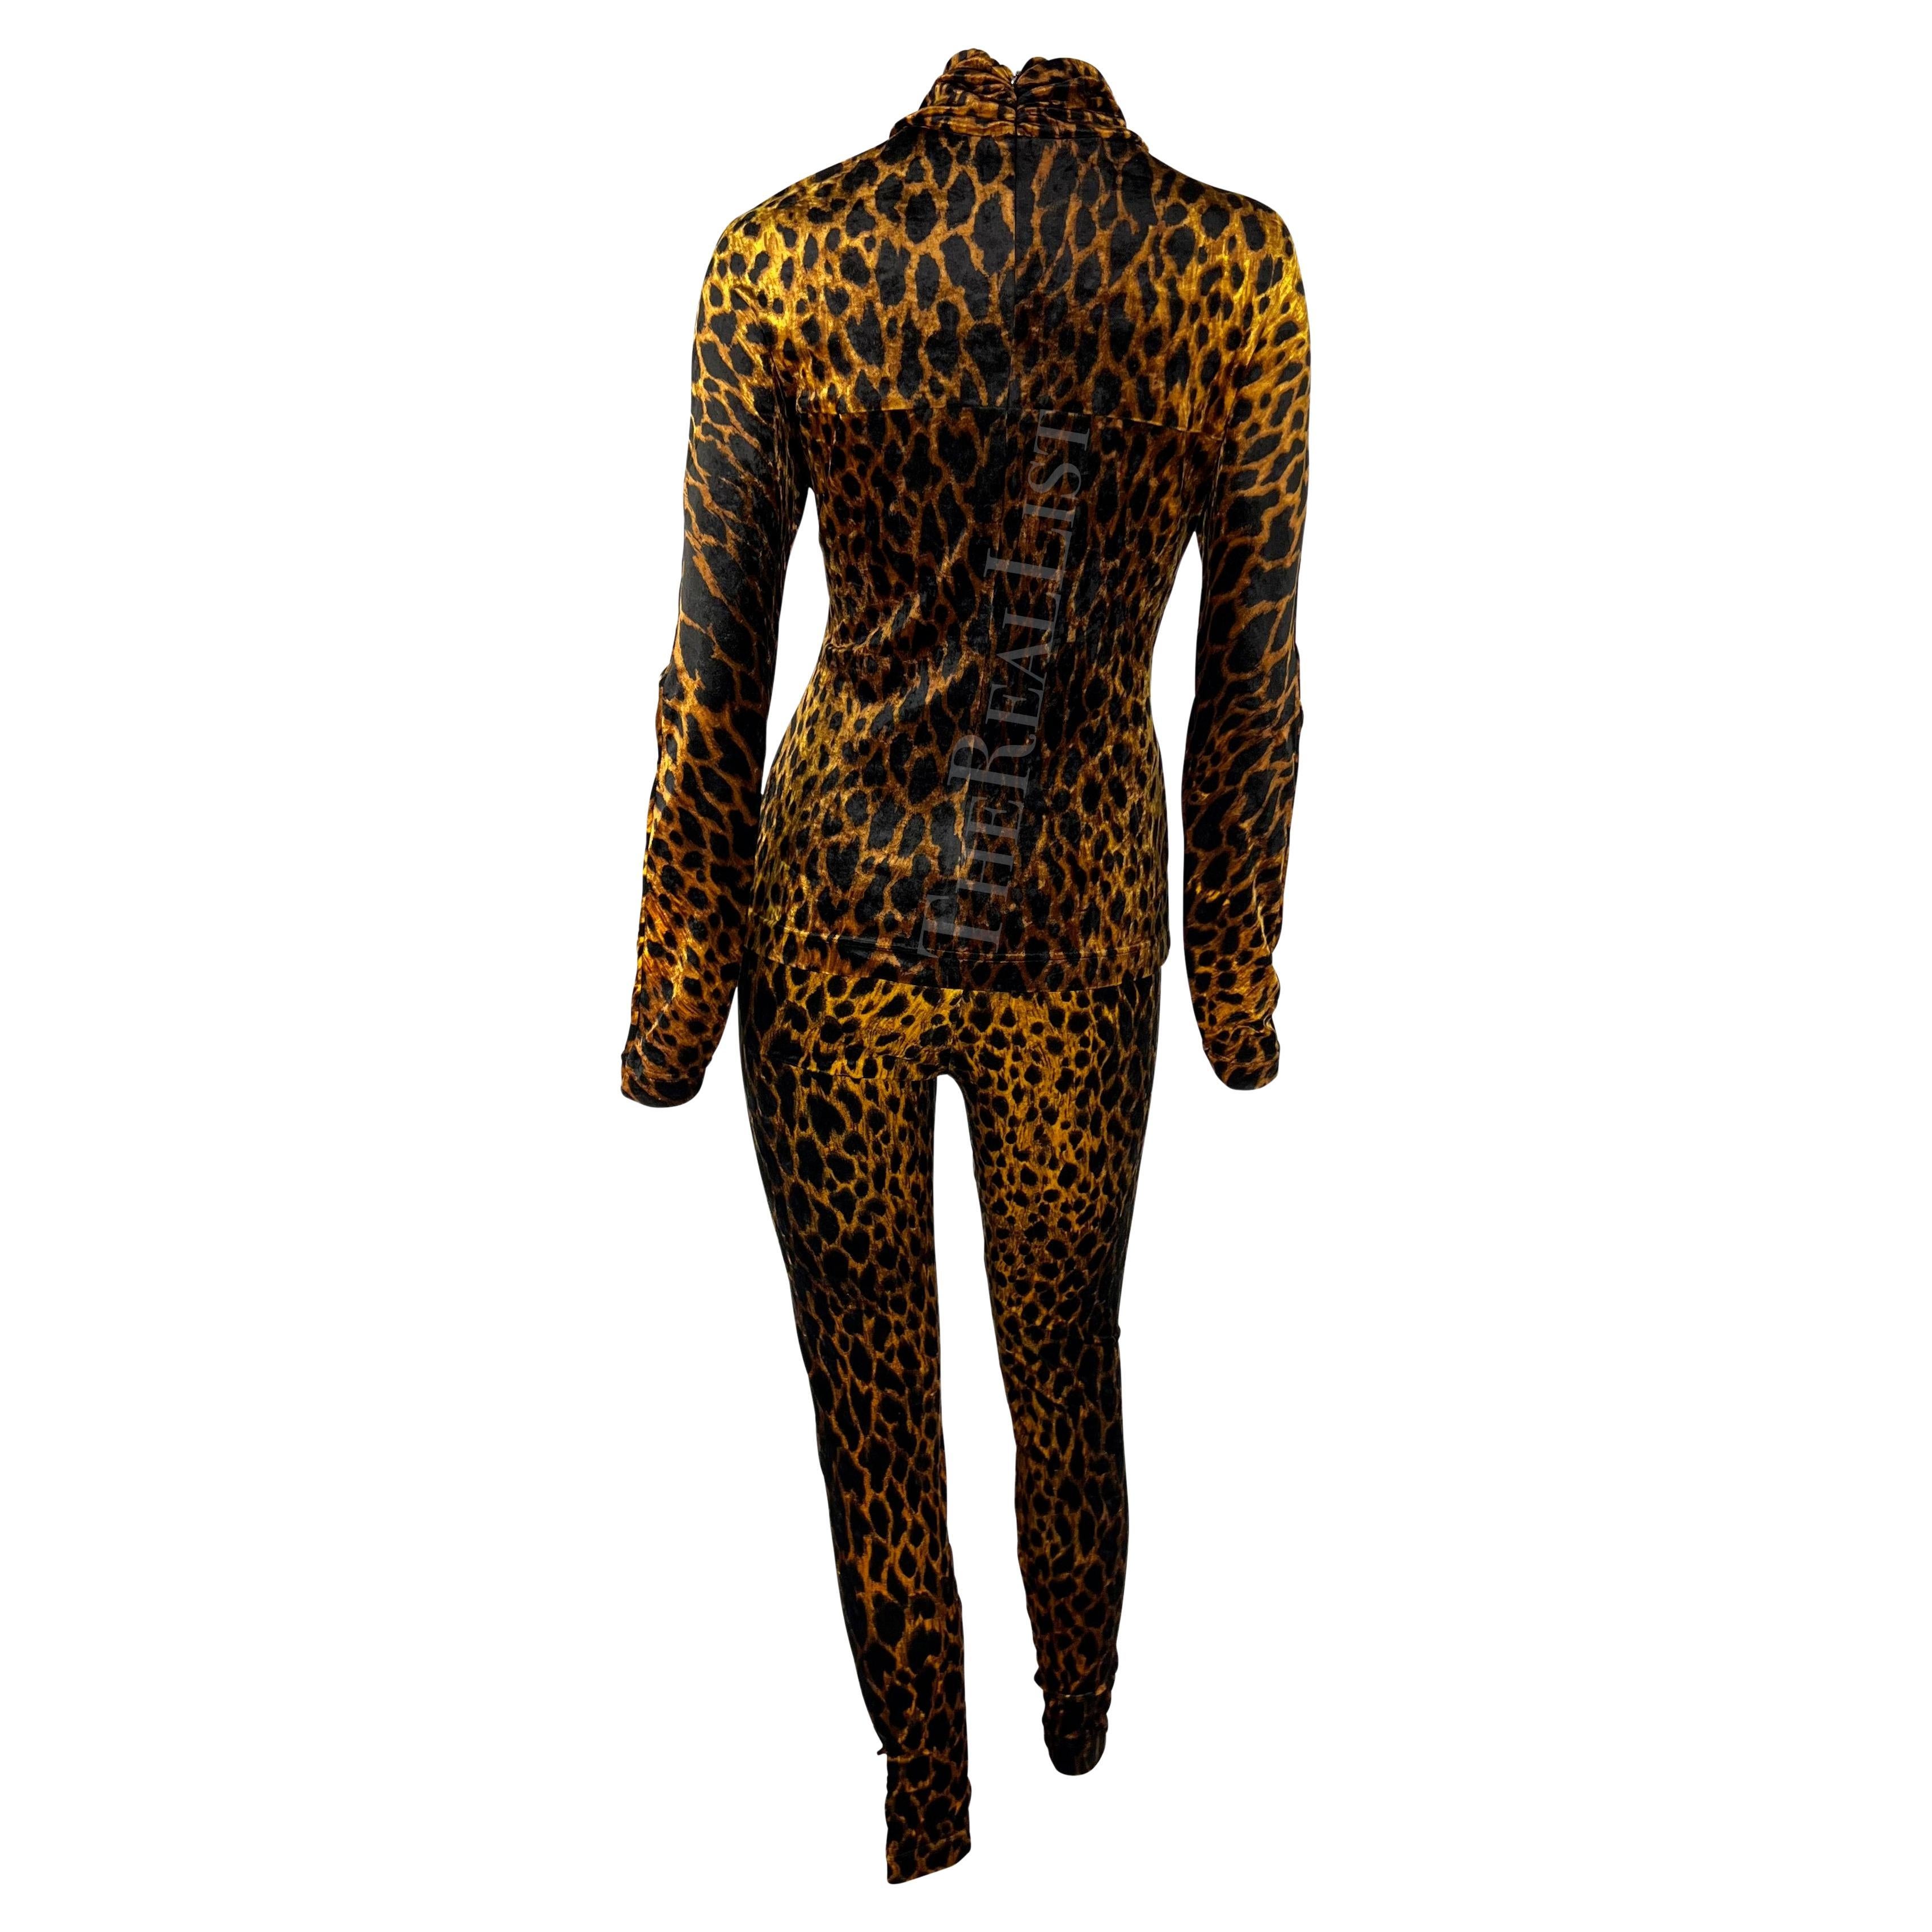 Women's F/W 1992 Gianni Versace Couture Brown Cheetah Print Velvet Pant Set For Sale